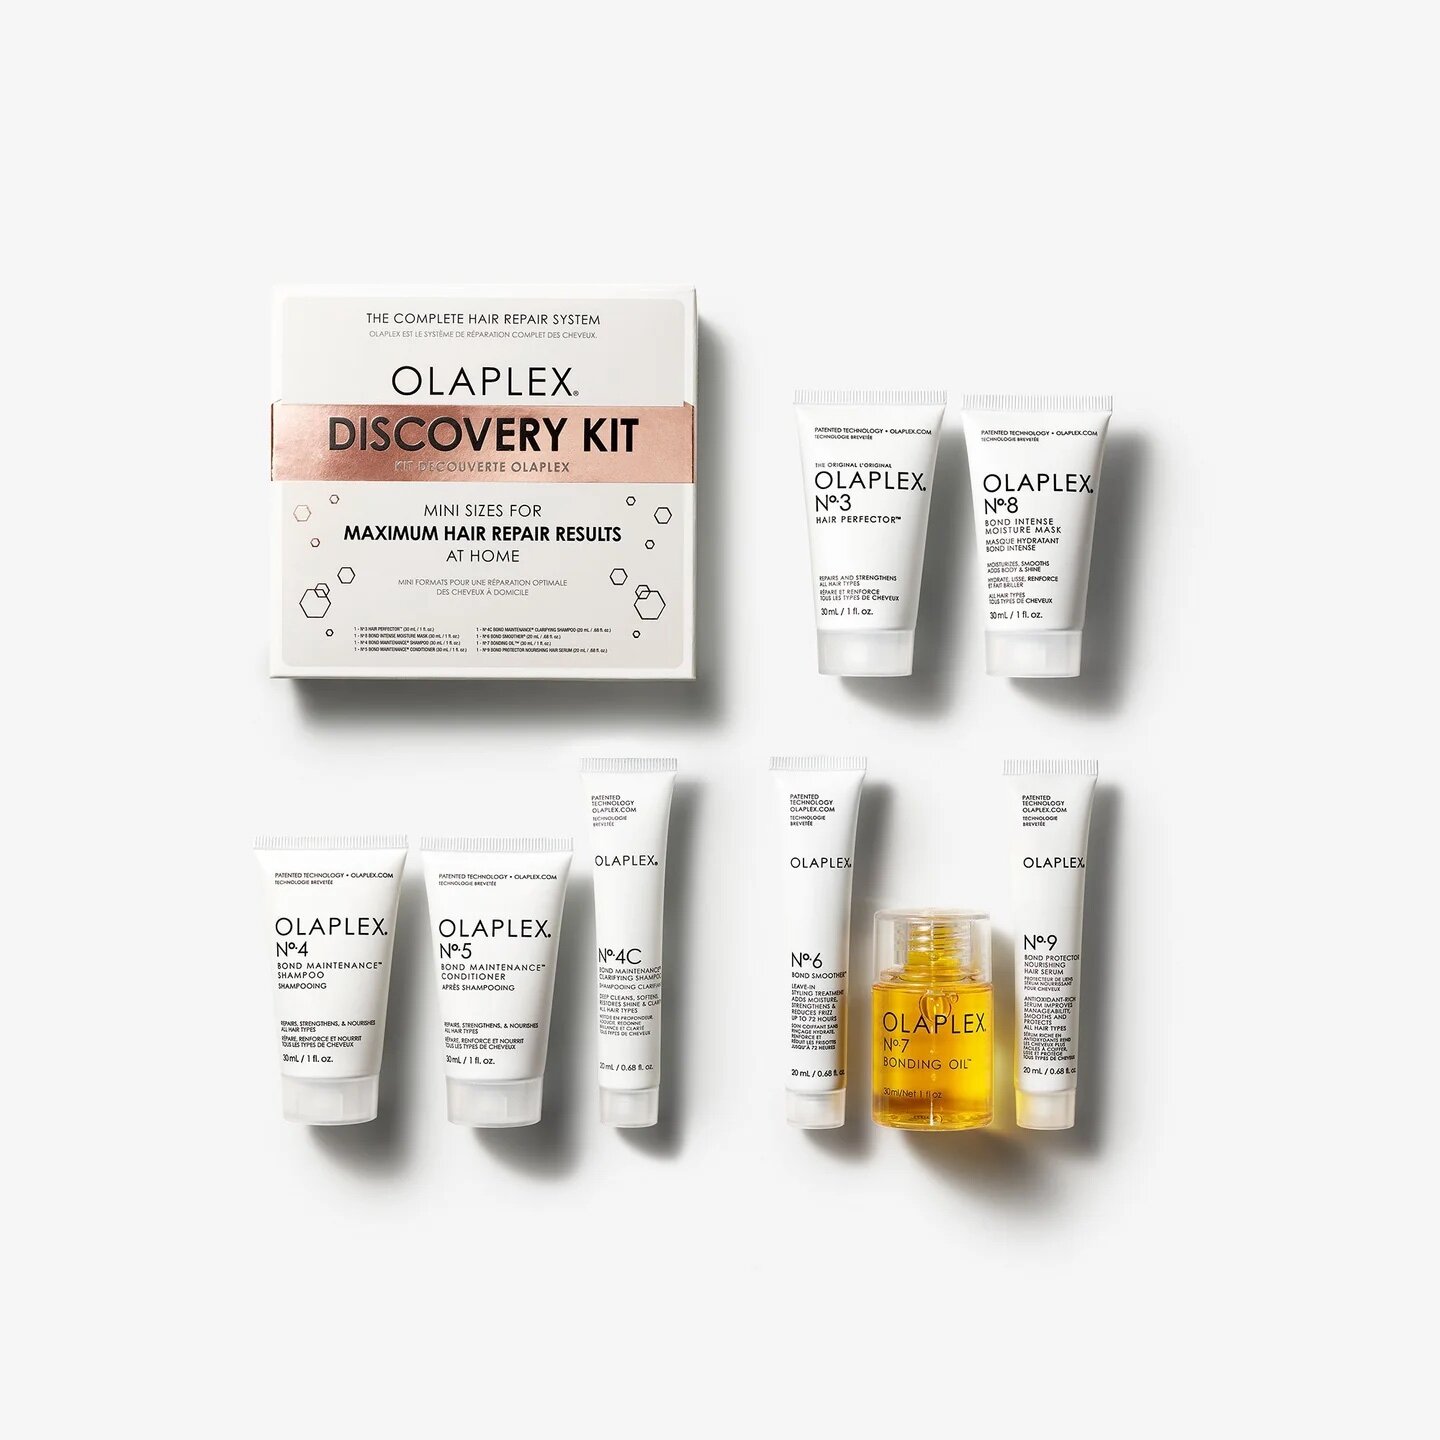 Discover Kit